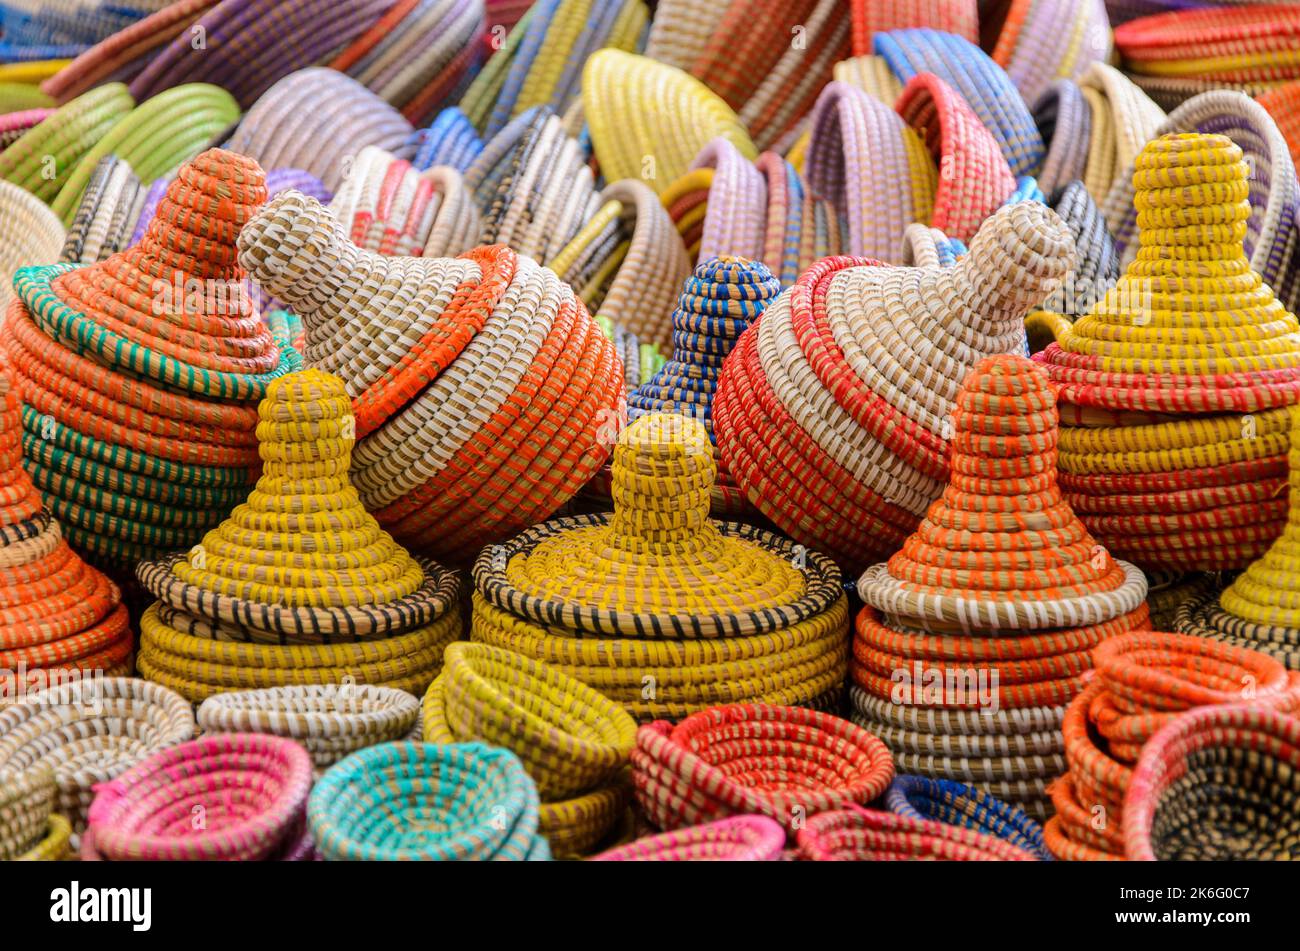 Beautiful colorful woven baskets from natural materials on market in detail view Stock Photo